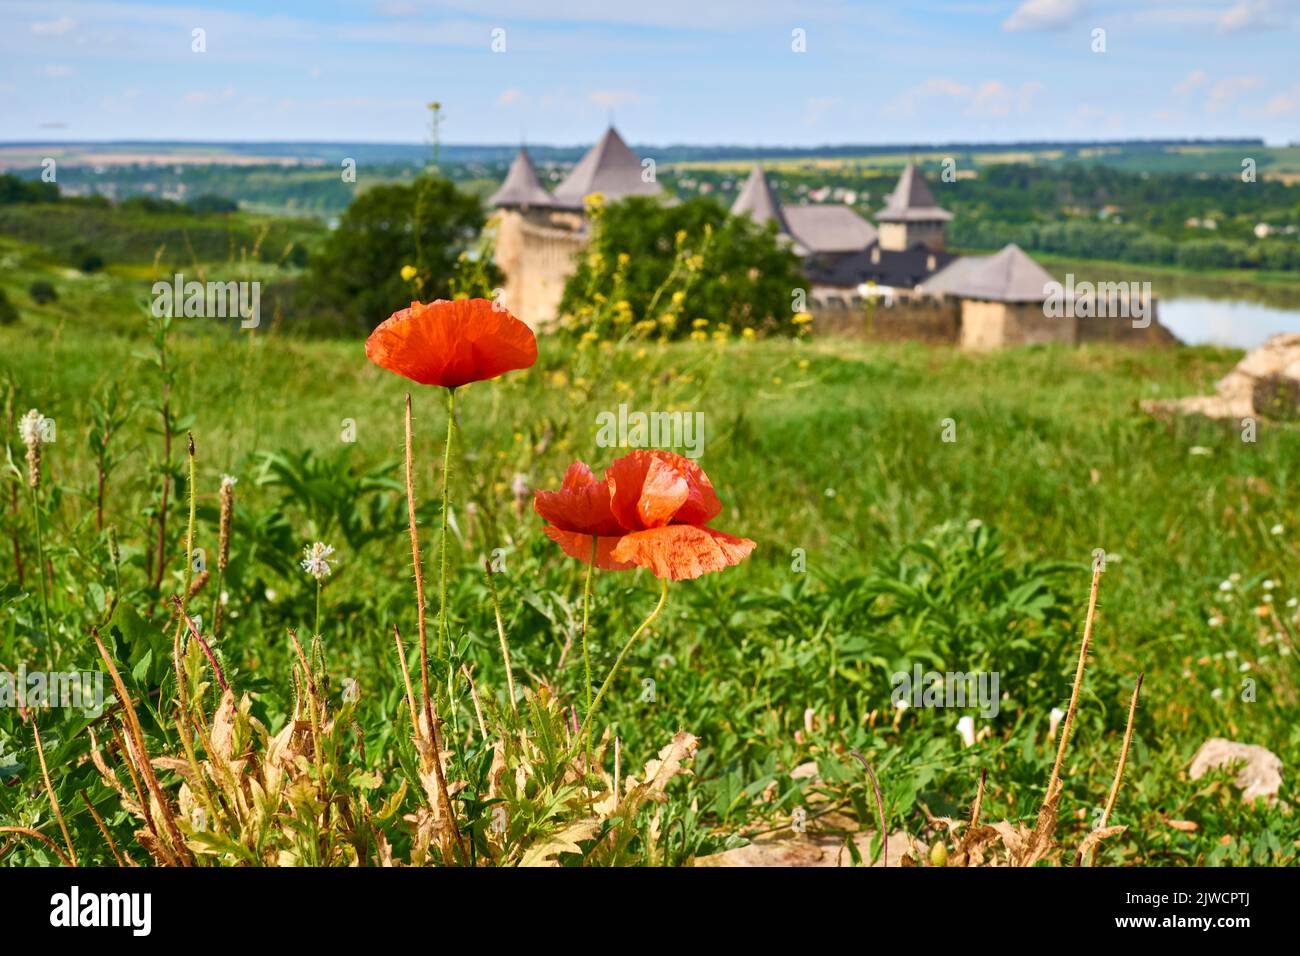 Two red scarlet poppies, a green field and an ancient fortress castle by river Stock Photo